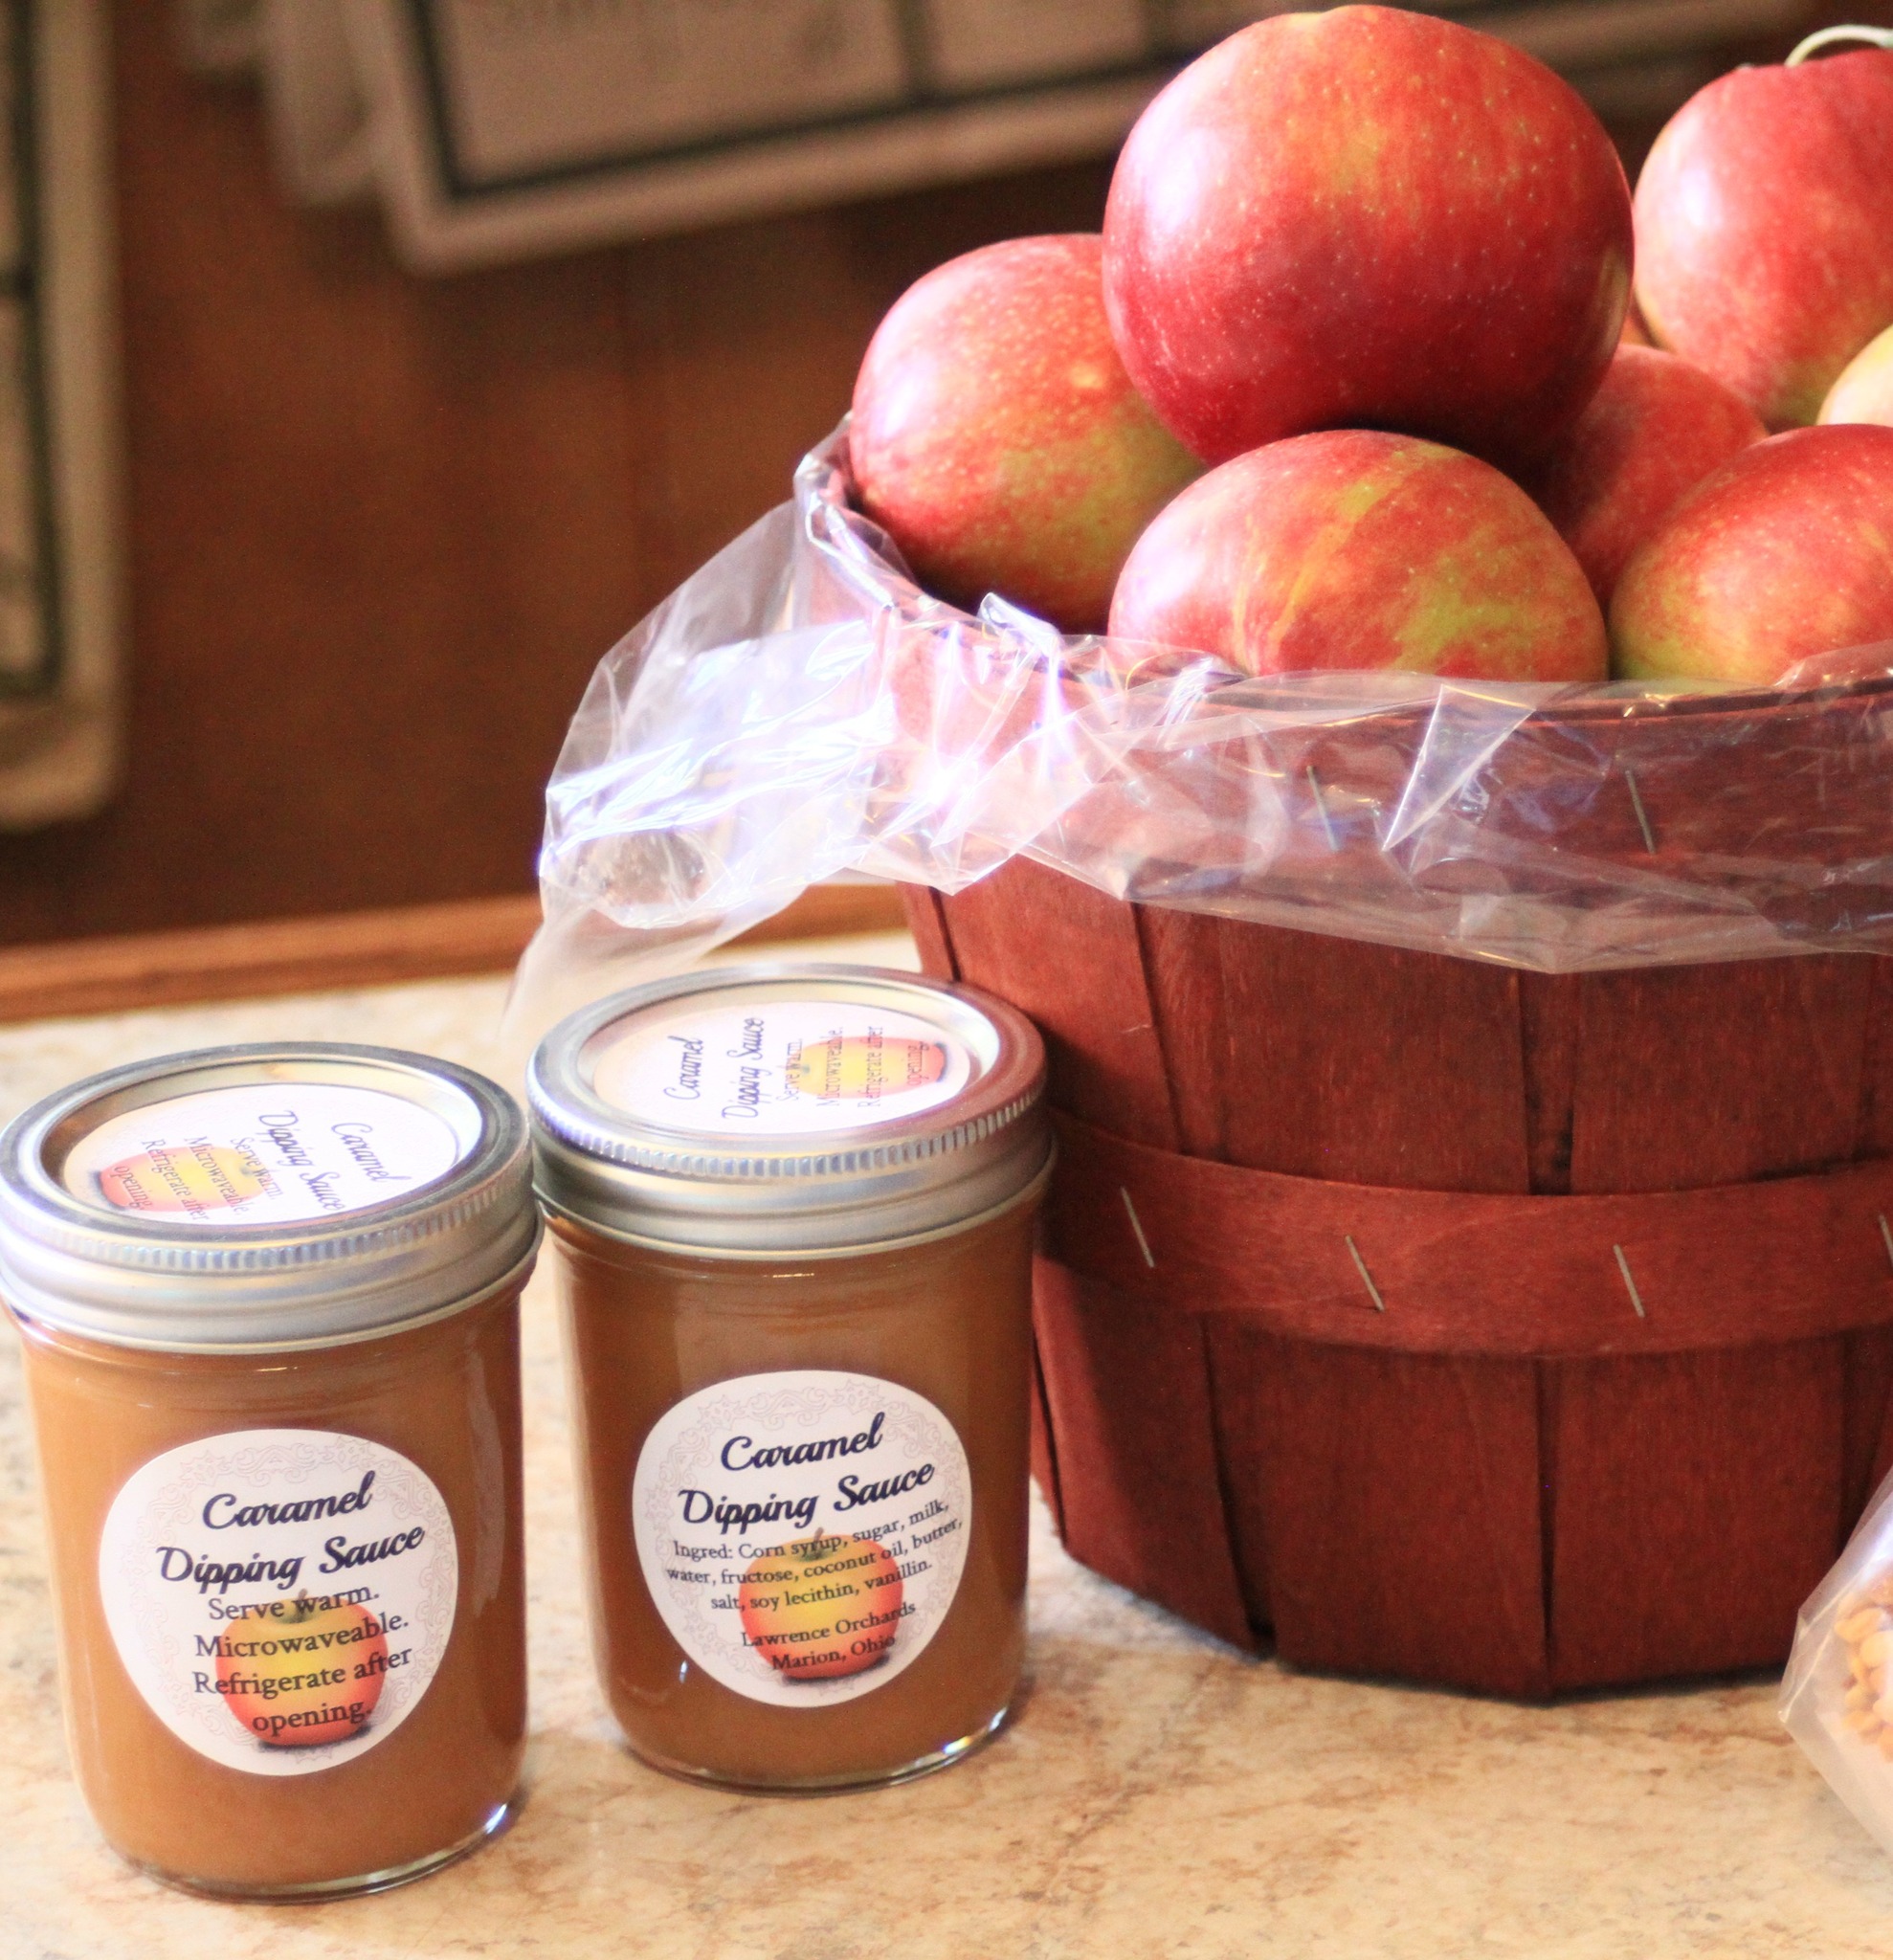 jars of caramel apple sauce and a basket of apples